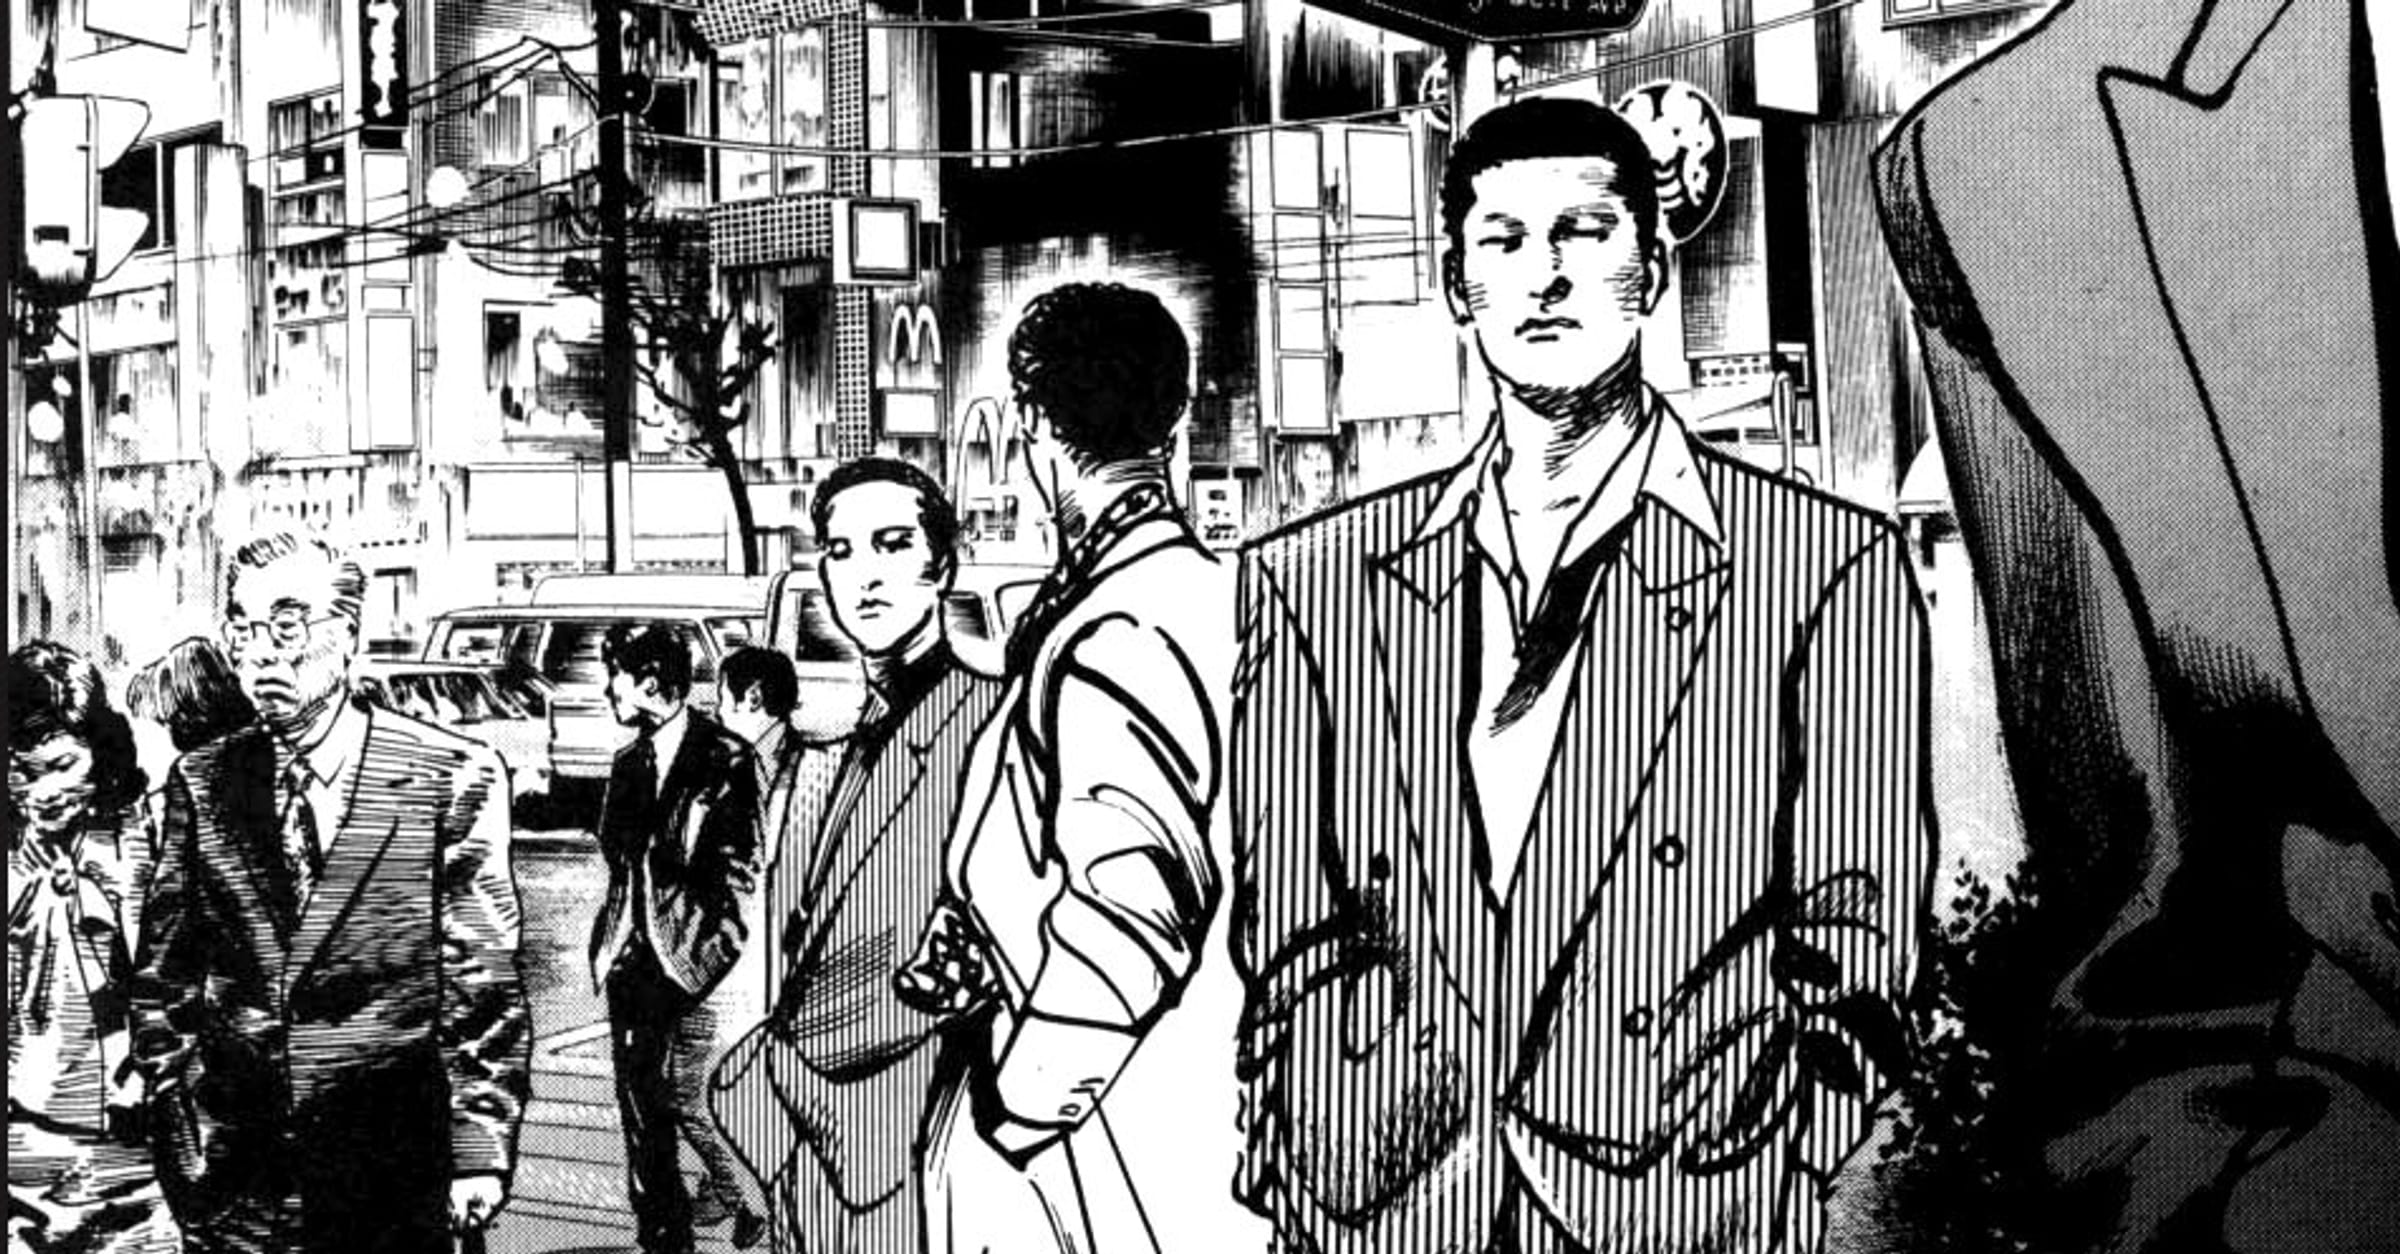 Lous and The Yakuza is one of the most interesting and coolest